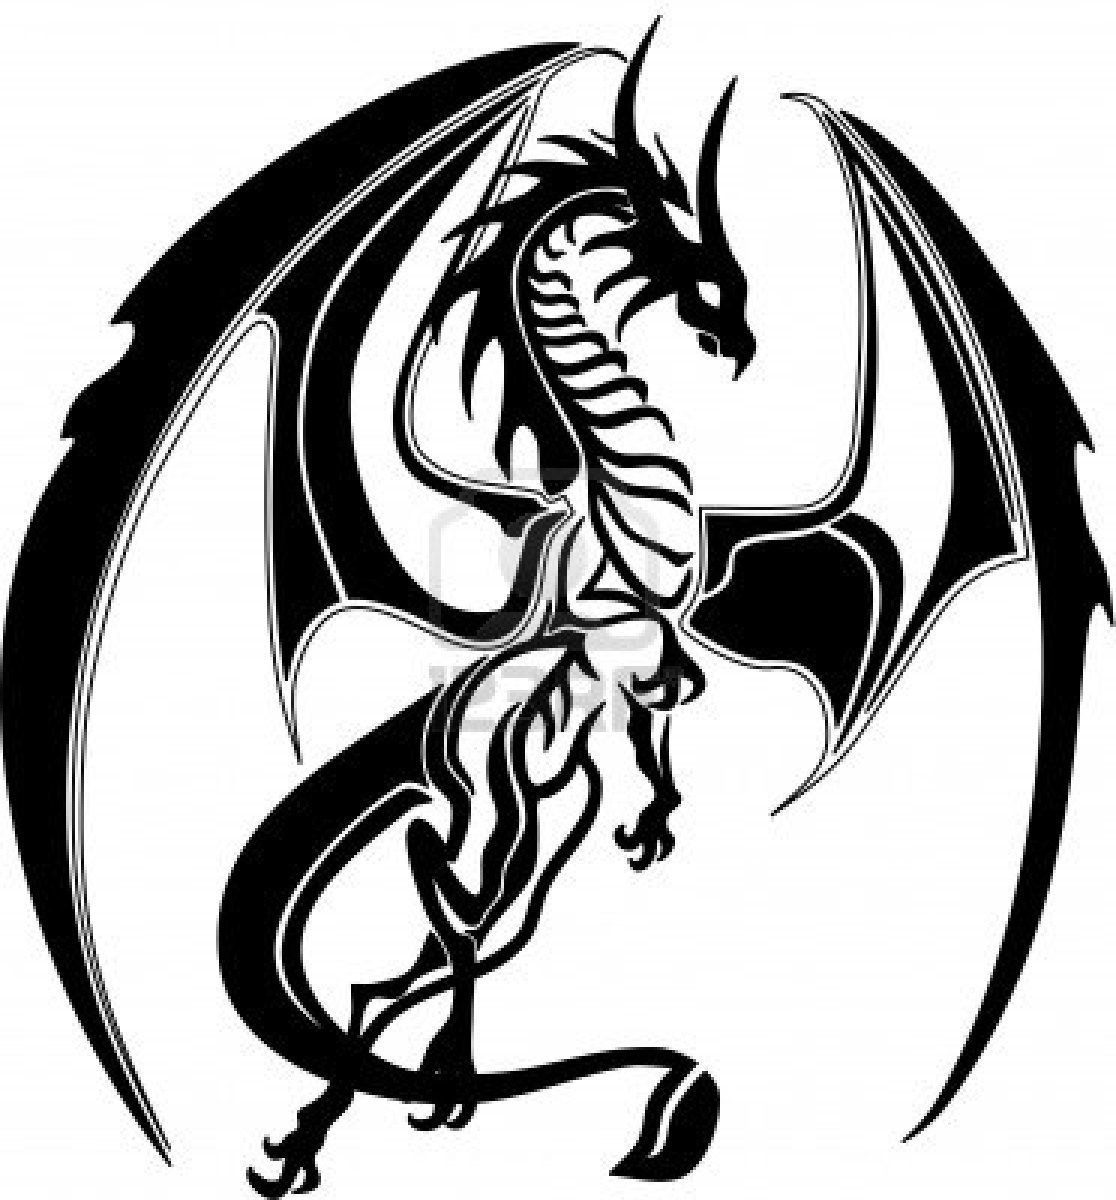 Dragon Tracing Pictures Dragon to Trace Clipart Best